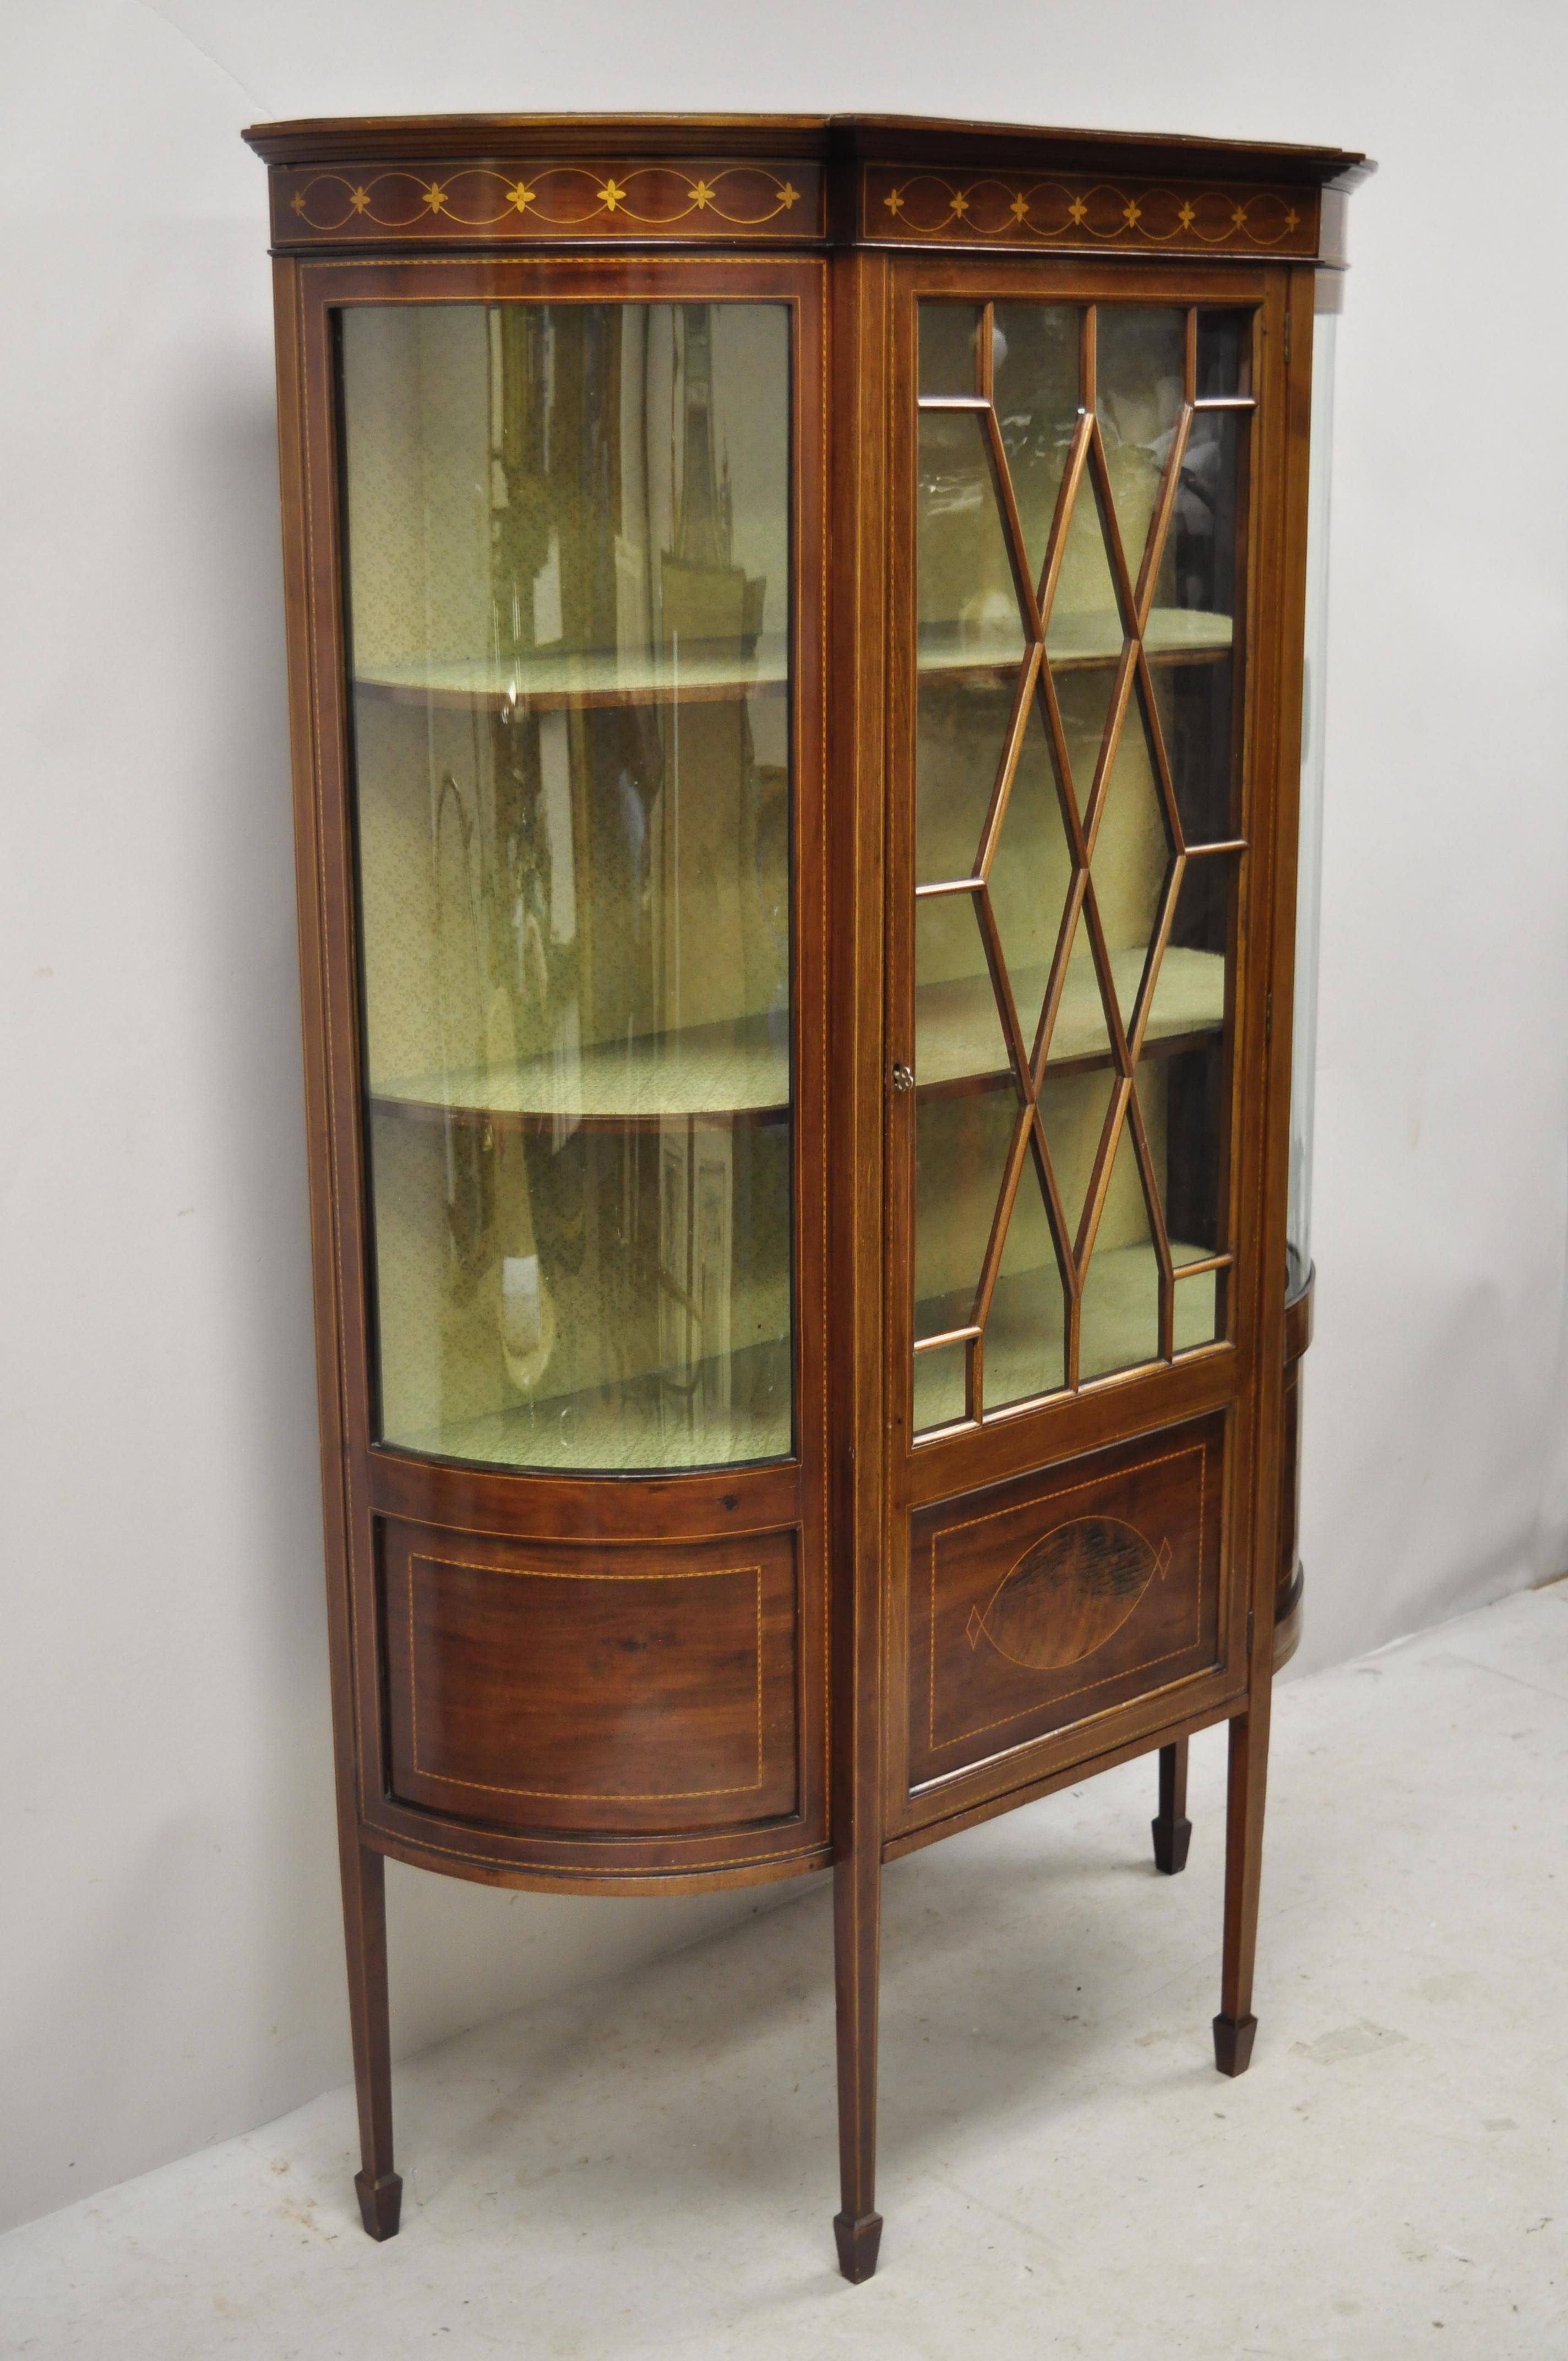 Antique English Edwardian satinwood inlay bowed curved glass China display cabinet curio. Item features satinwood inlay, curved glass sides, individual pieces of glass to front door, beautiful wood grain, 1 swing door, working lock and key, 2 wooden